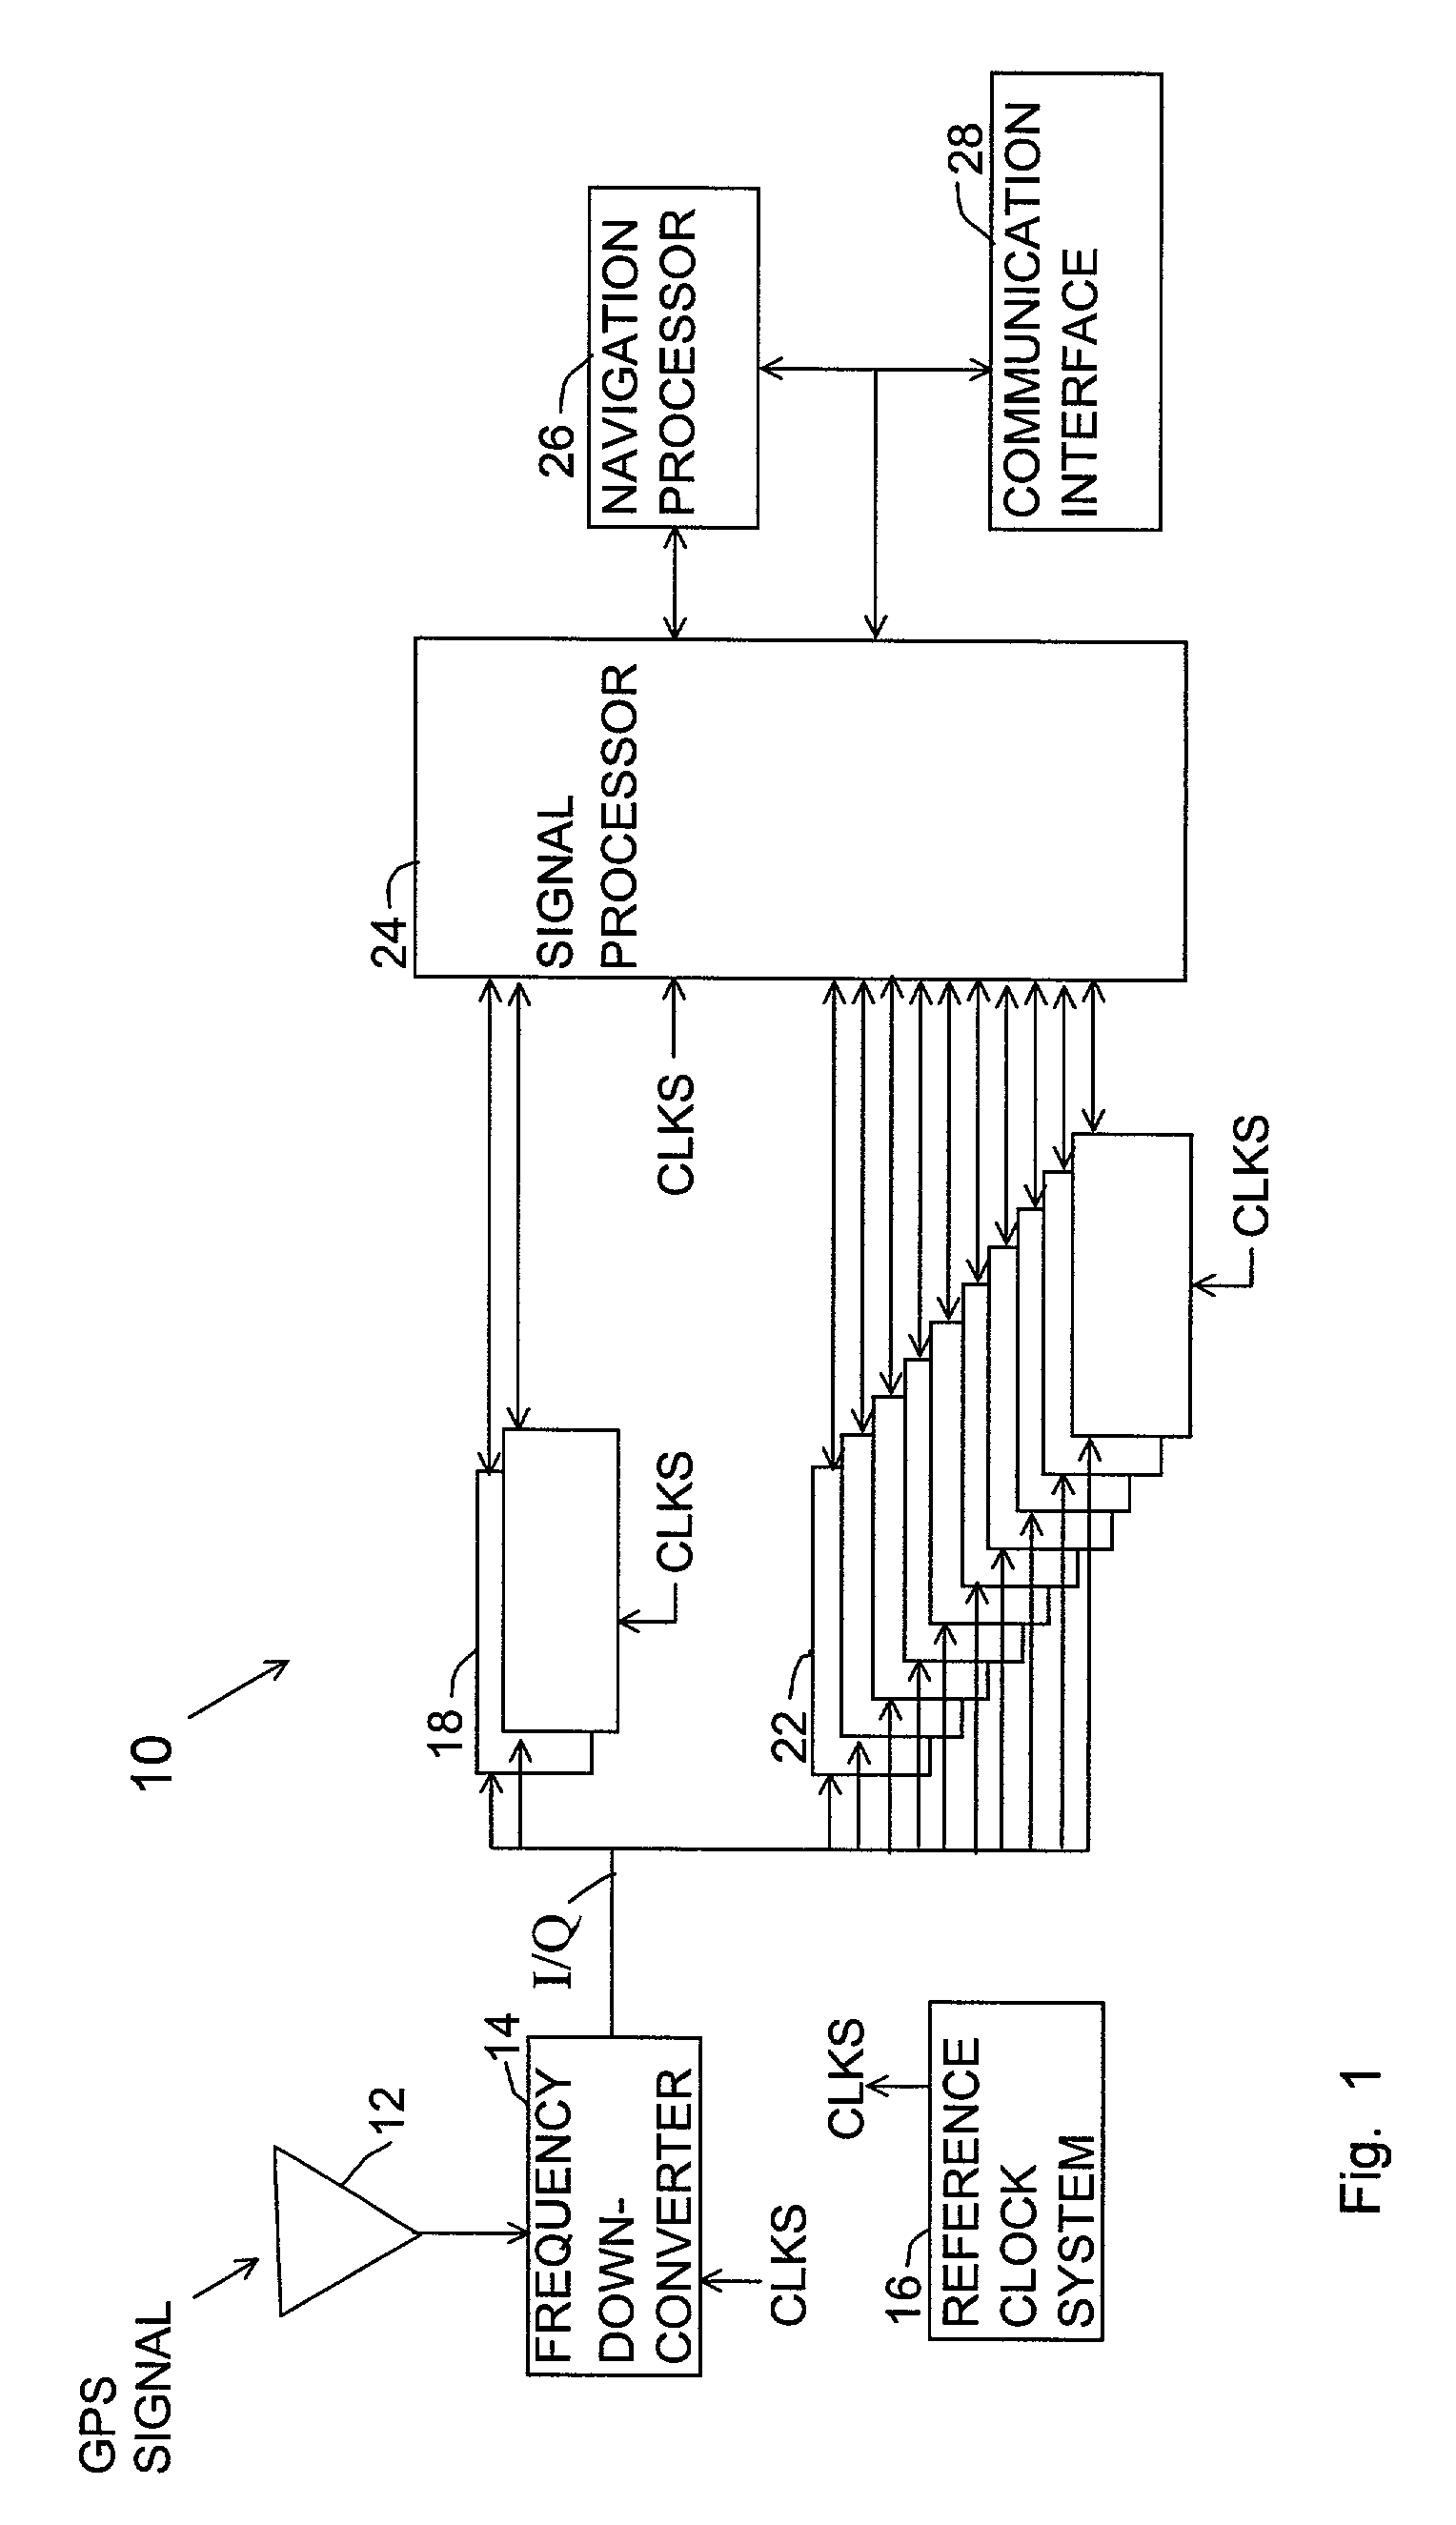 GPS receiver having dynamic correlator allocation between a memory-enhanced channel for acquisition and standard channels for tracking